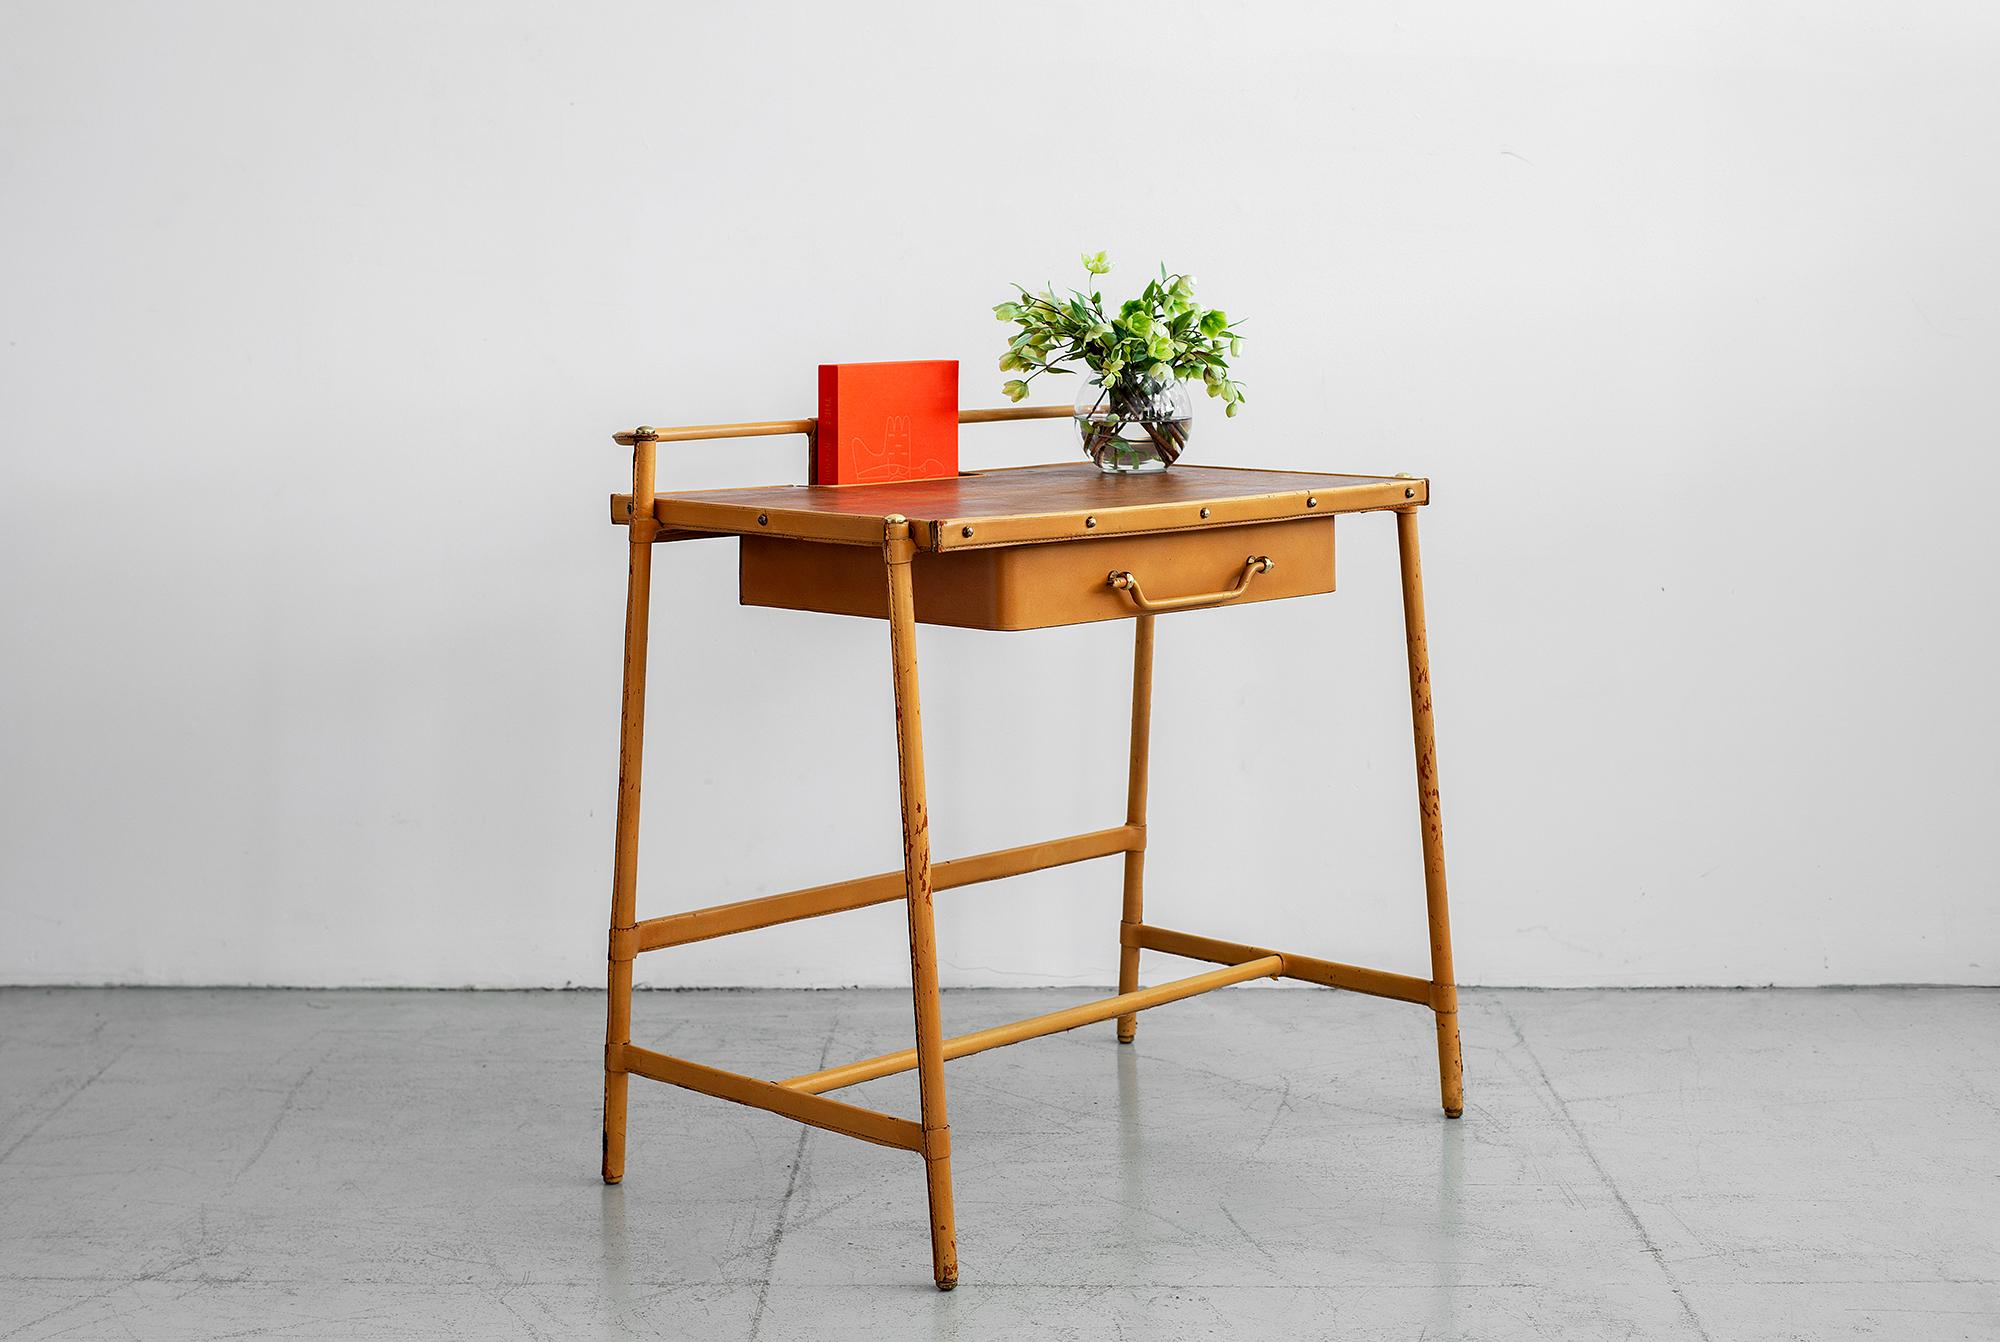 Petite leather desk by Jacques Adnet with caramel stitched leather, single leather drawer, oak veneer top and floating filing tray on the back of desk. 
Brass studs, screws and hardware throughout. 

Measures: H 81.5 x 83.5 L x 52.5 cm • H P 32